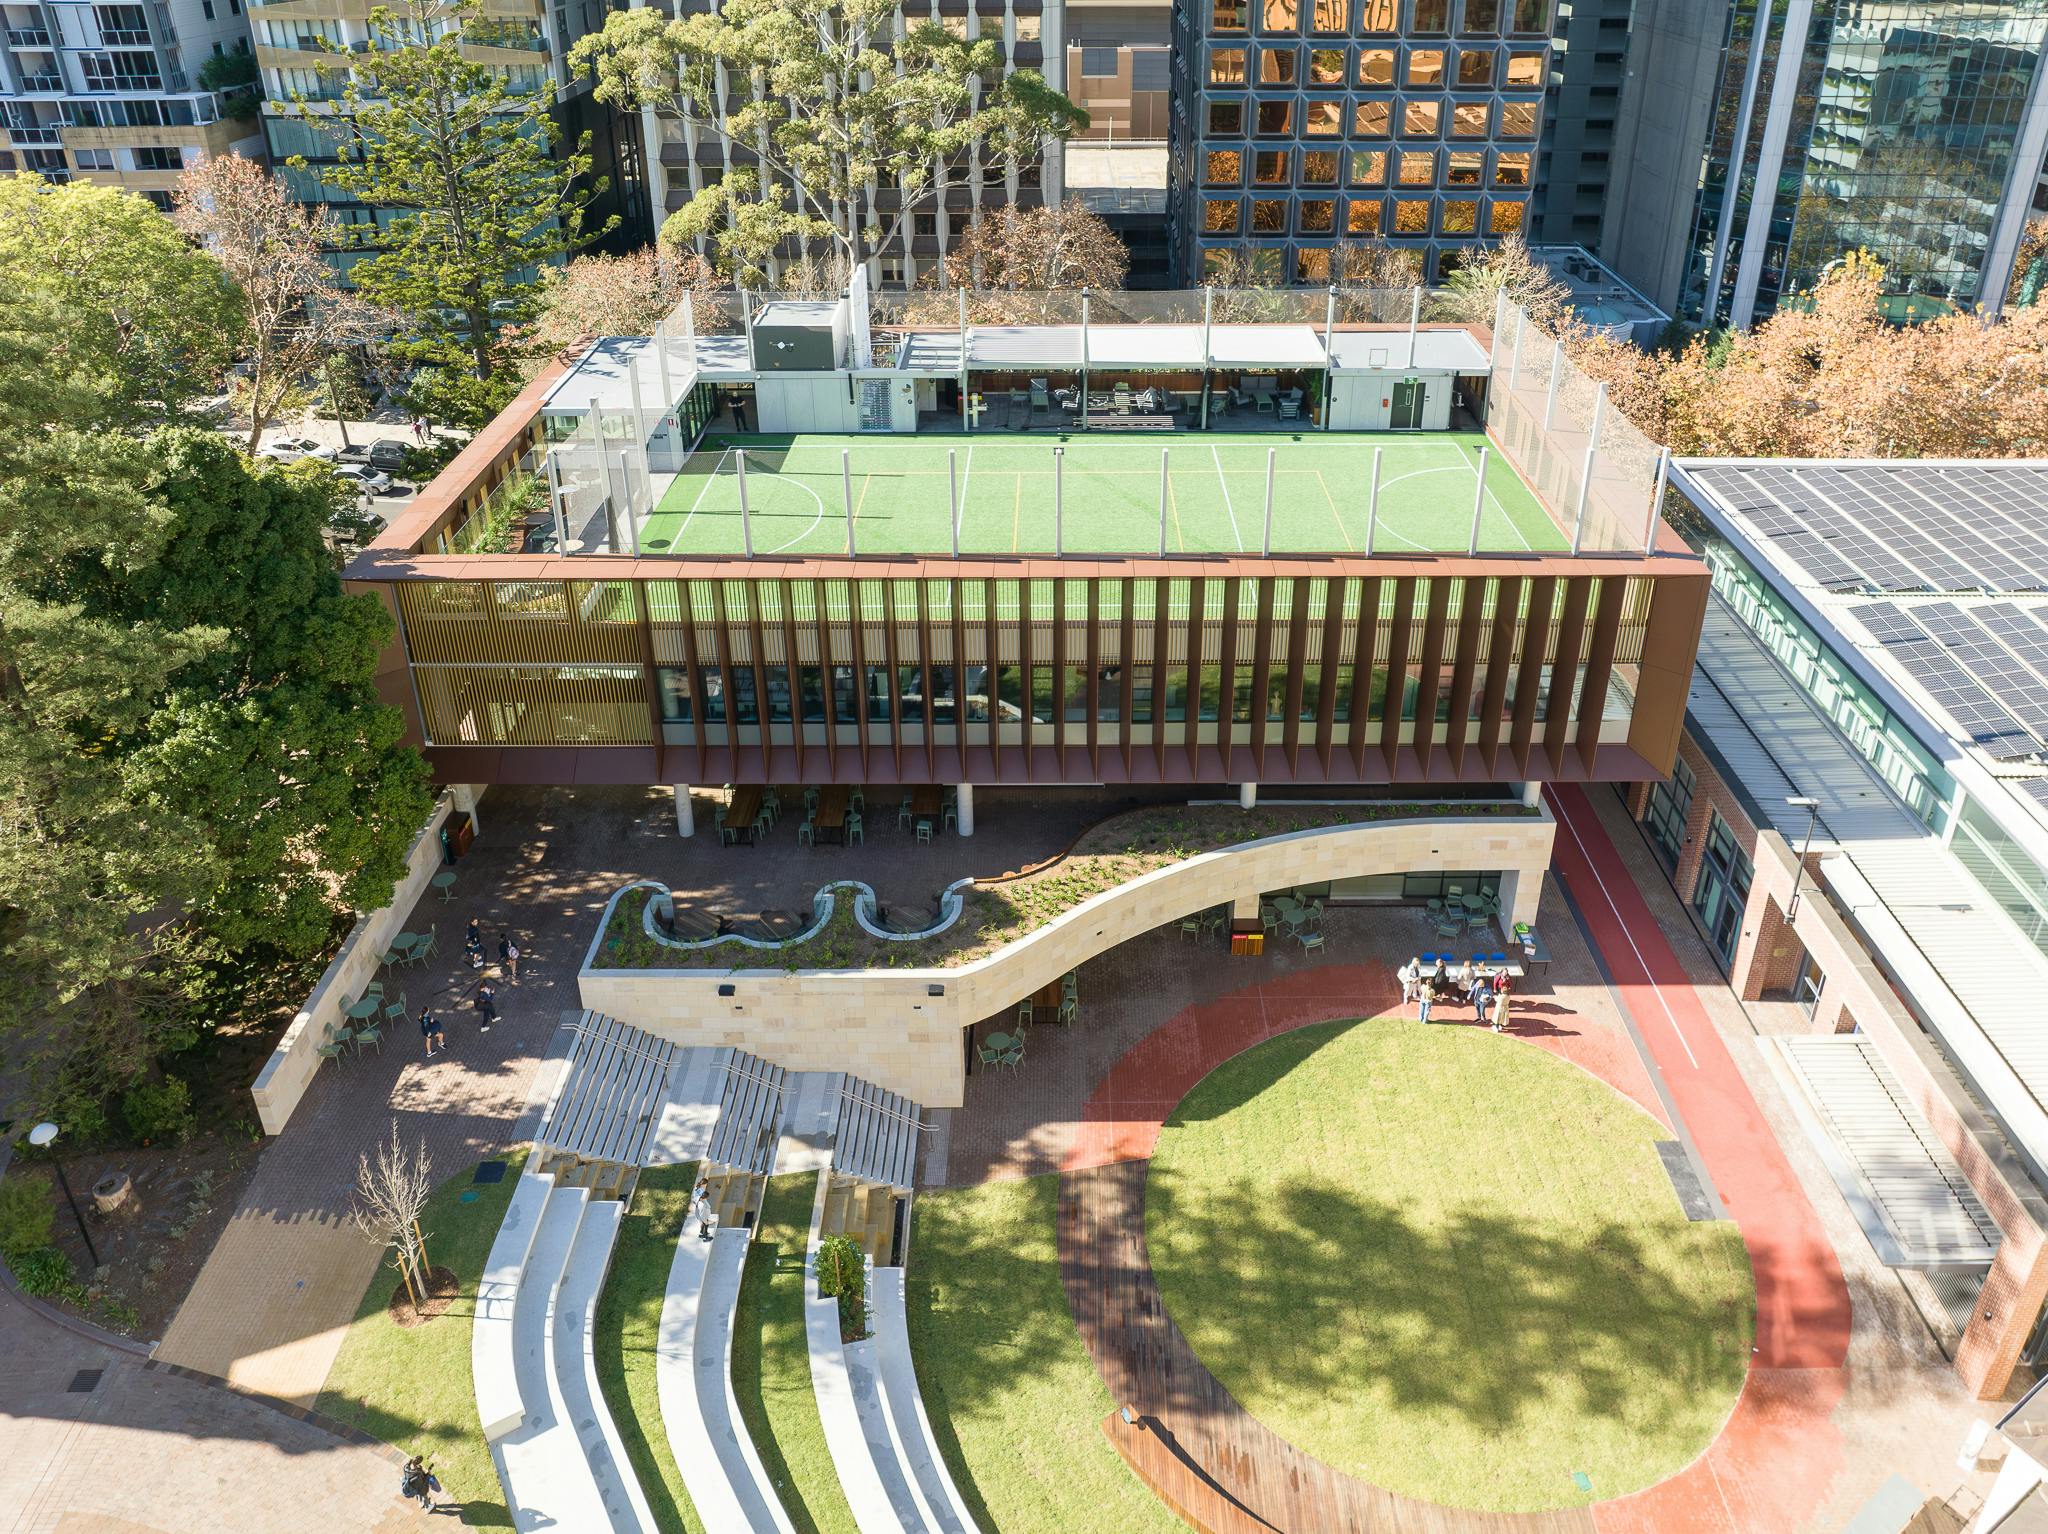 Innovative learning spaces blend into the landscape